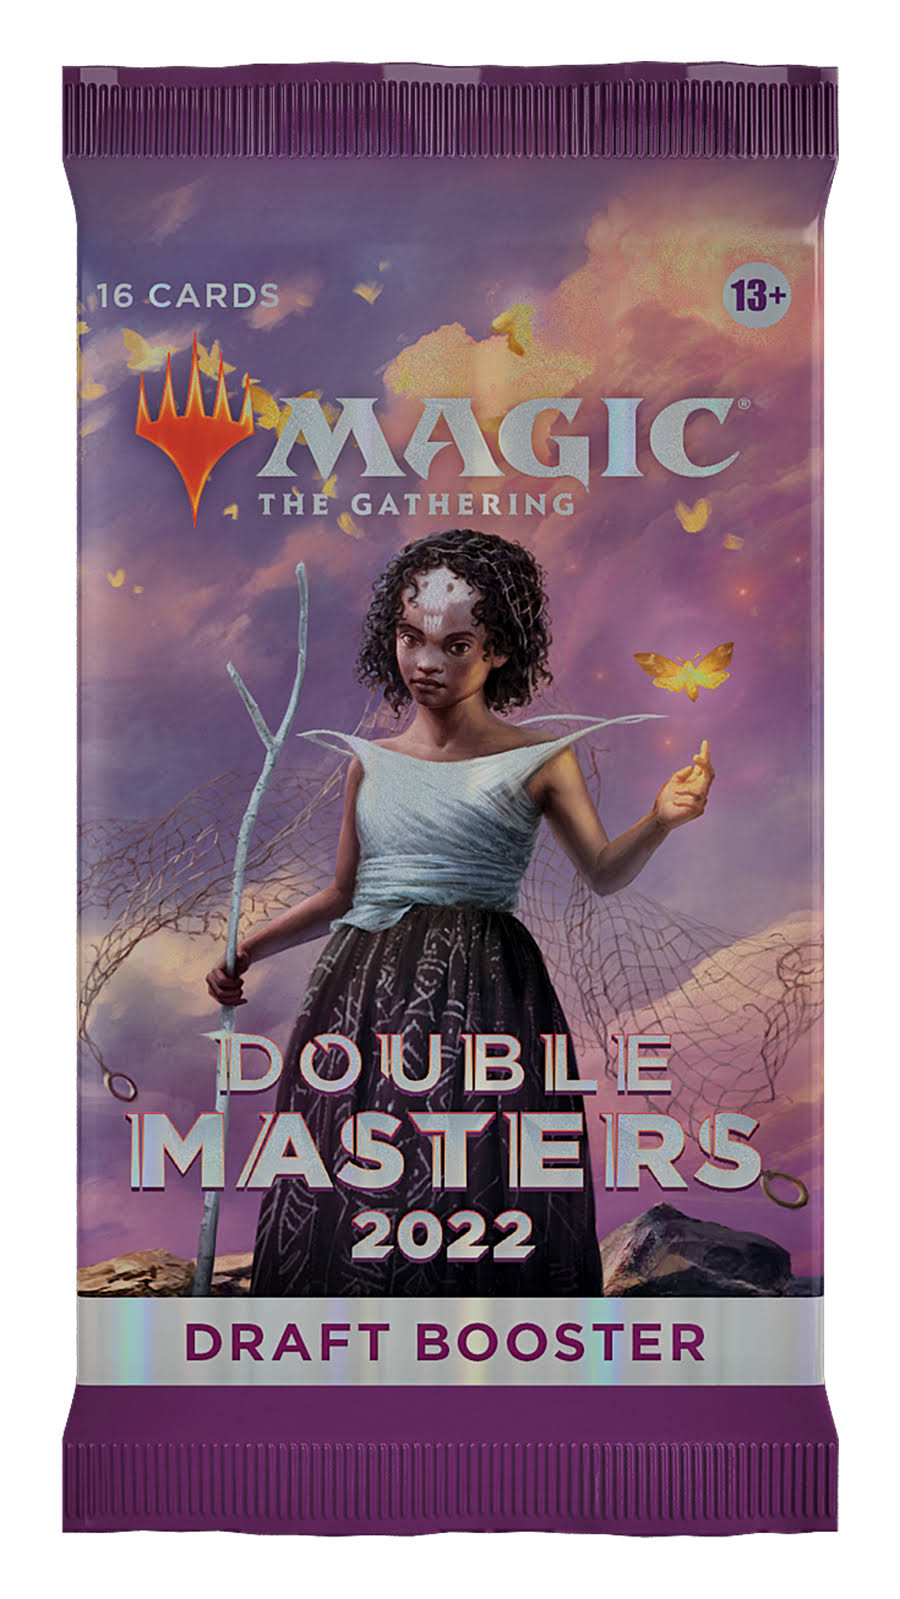 Magic: The Gathering - Double Masters 2022 Draft Booster Pack